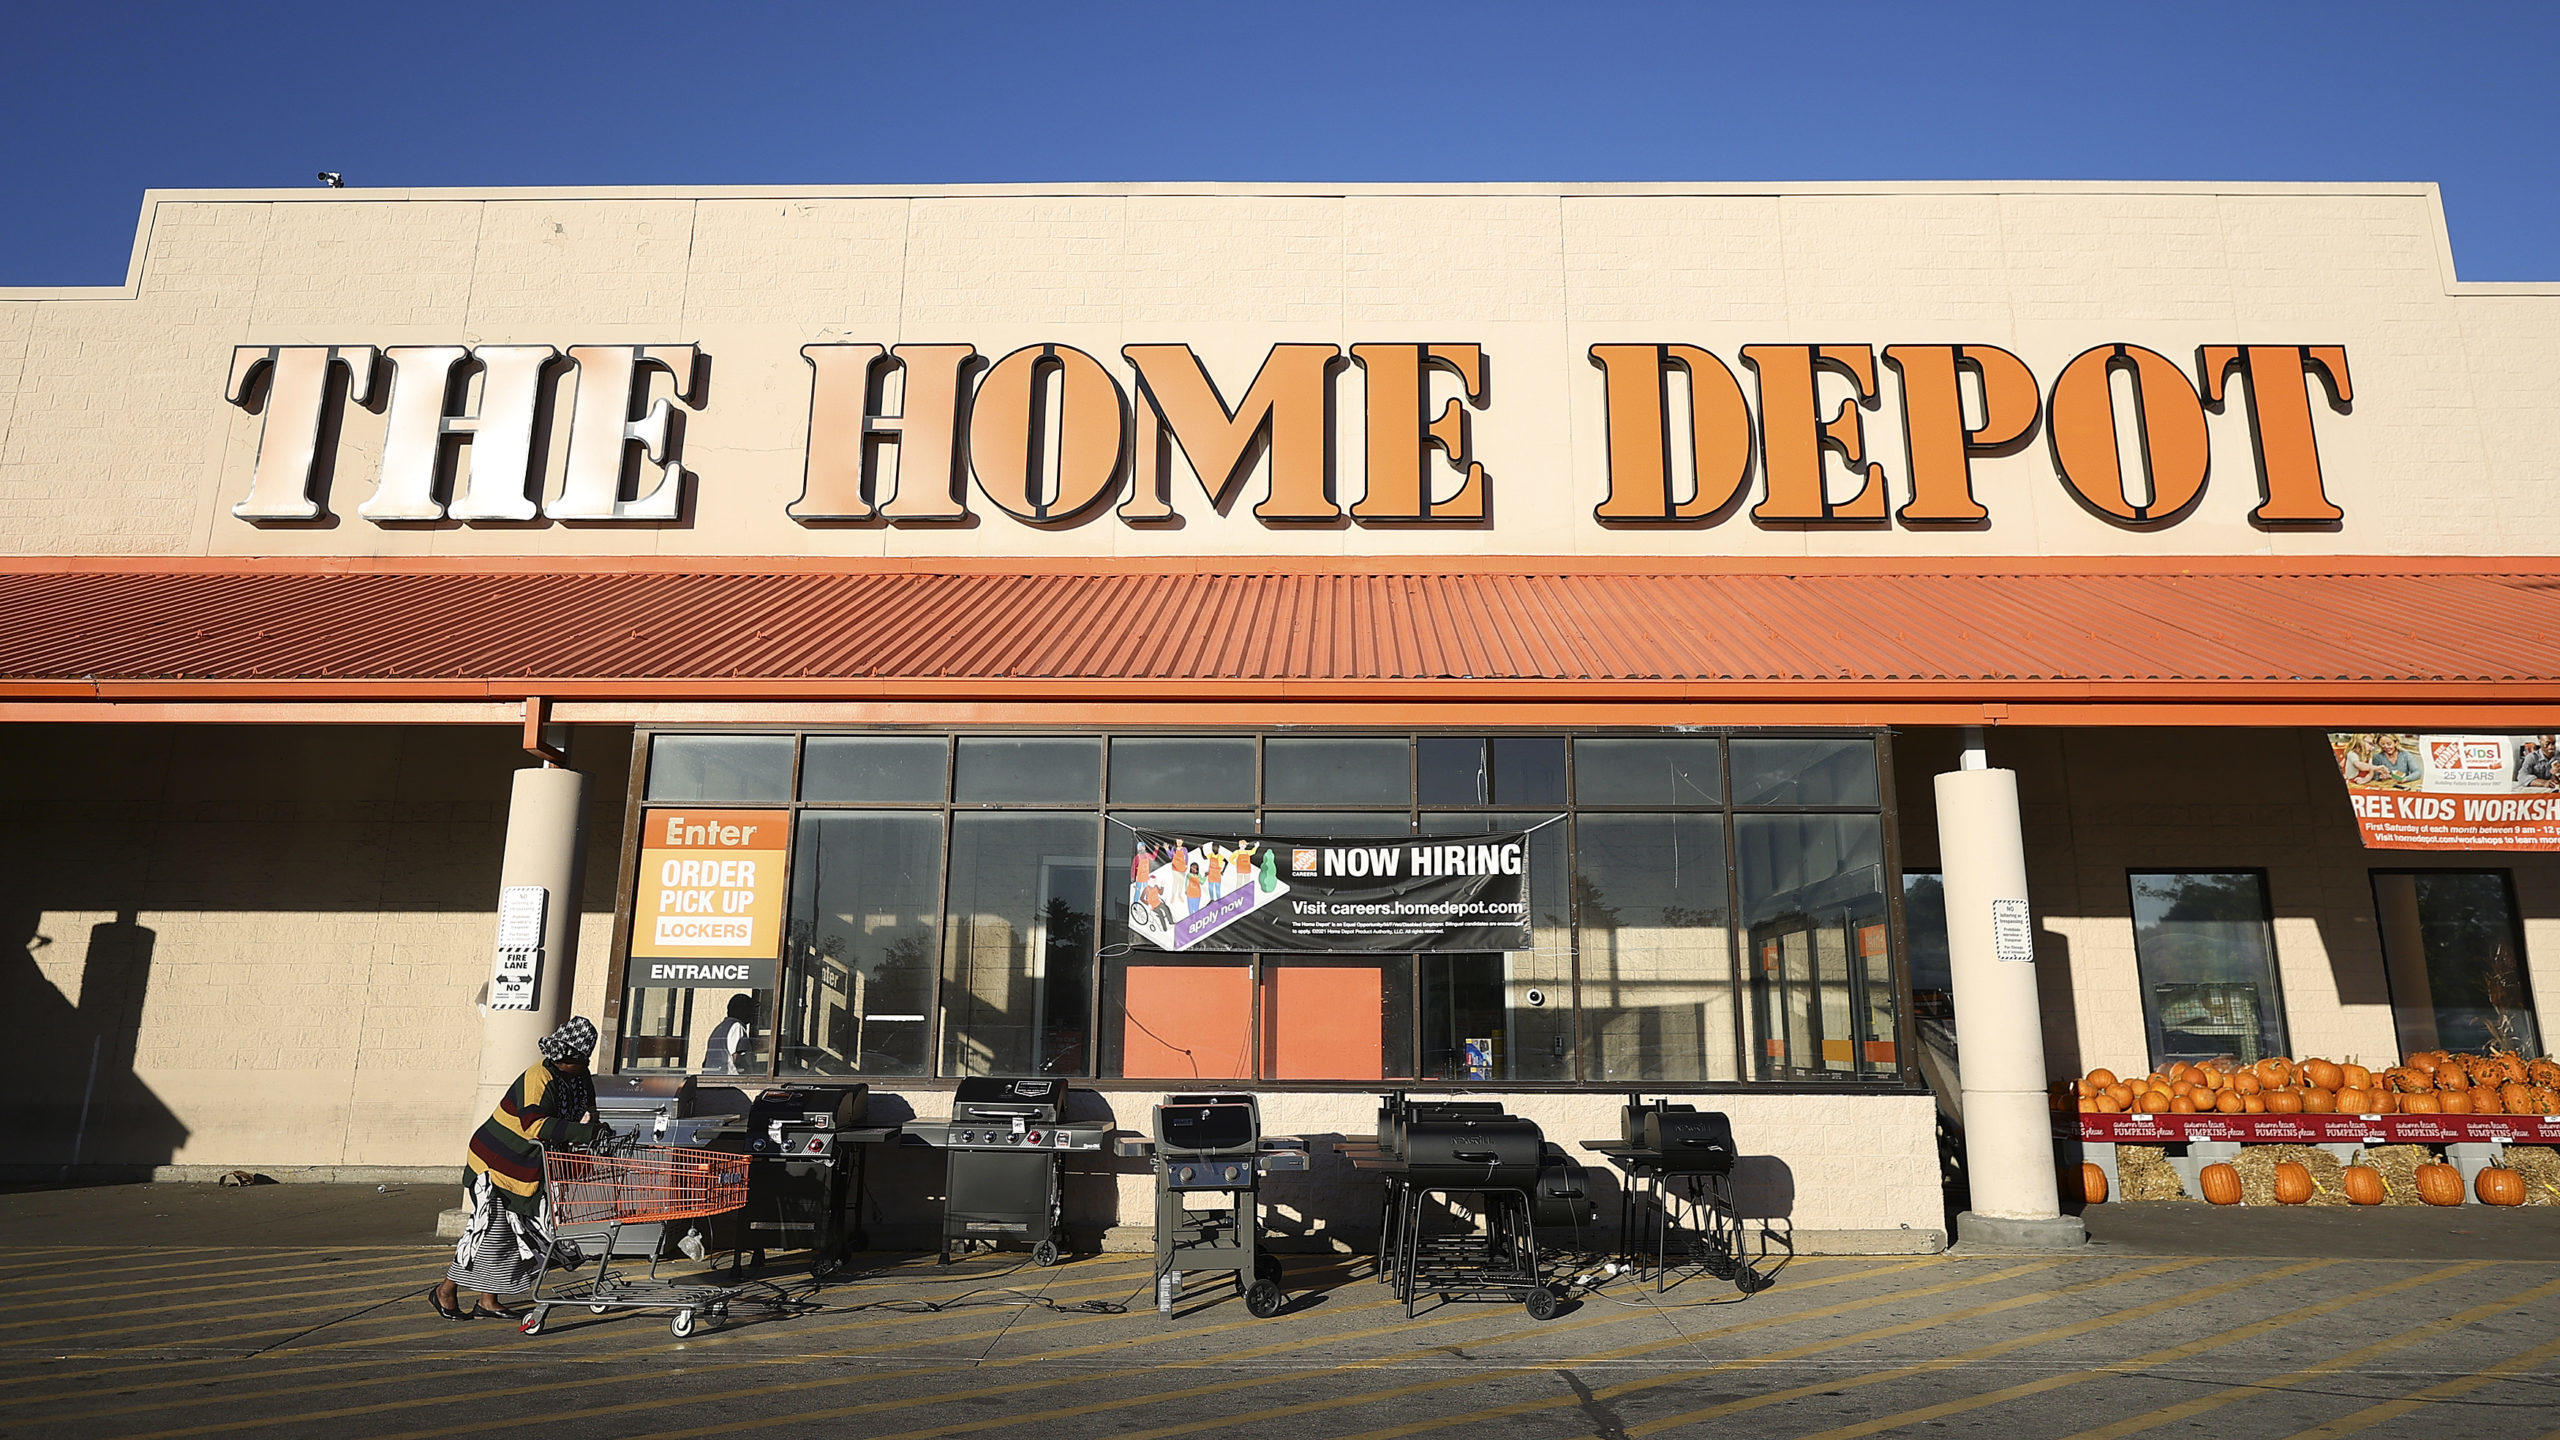 Home Depot said Tuesday it's investing $1 billion in wage increases for its U.S. and Canadian hourl...